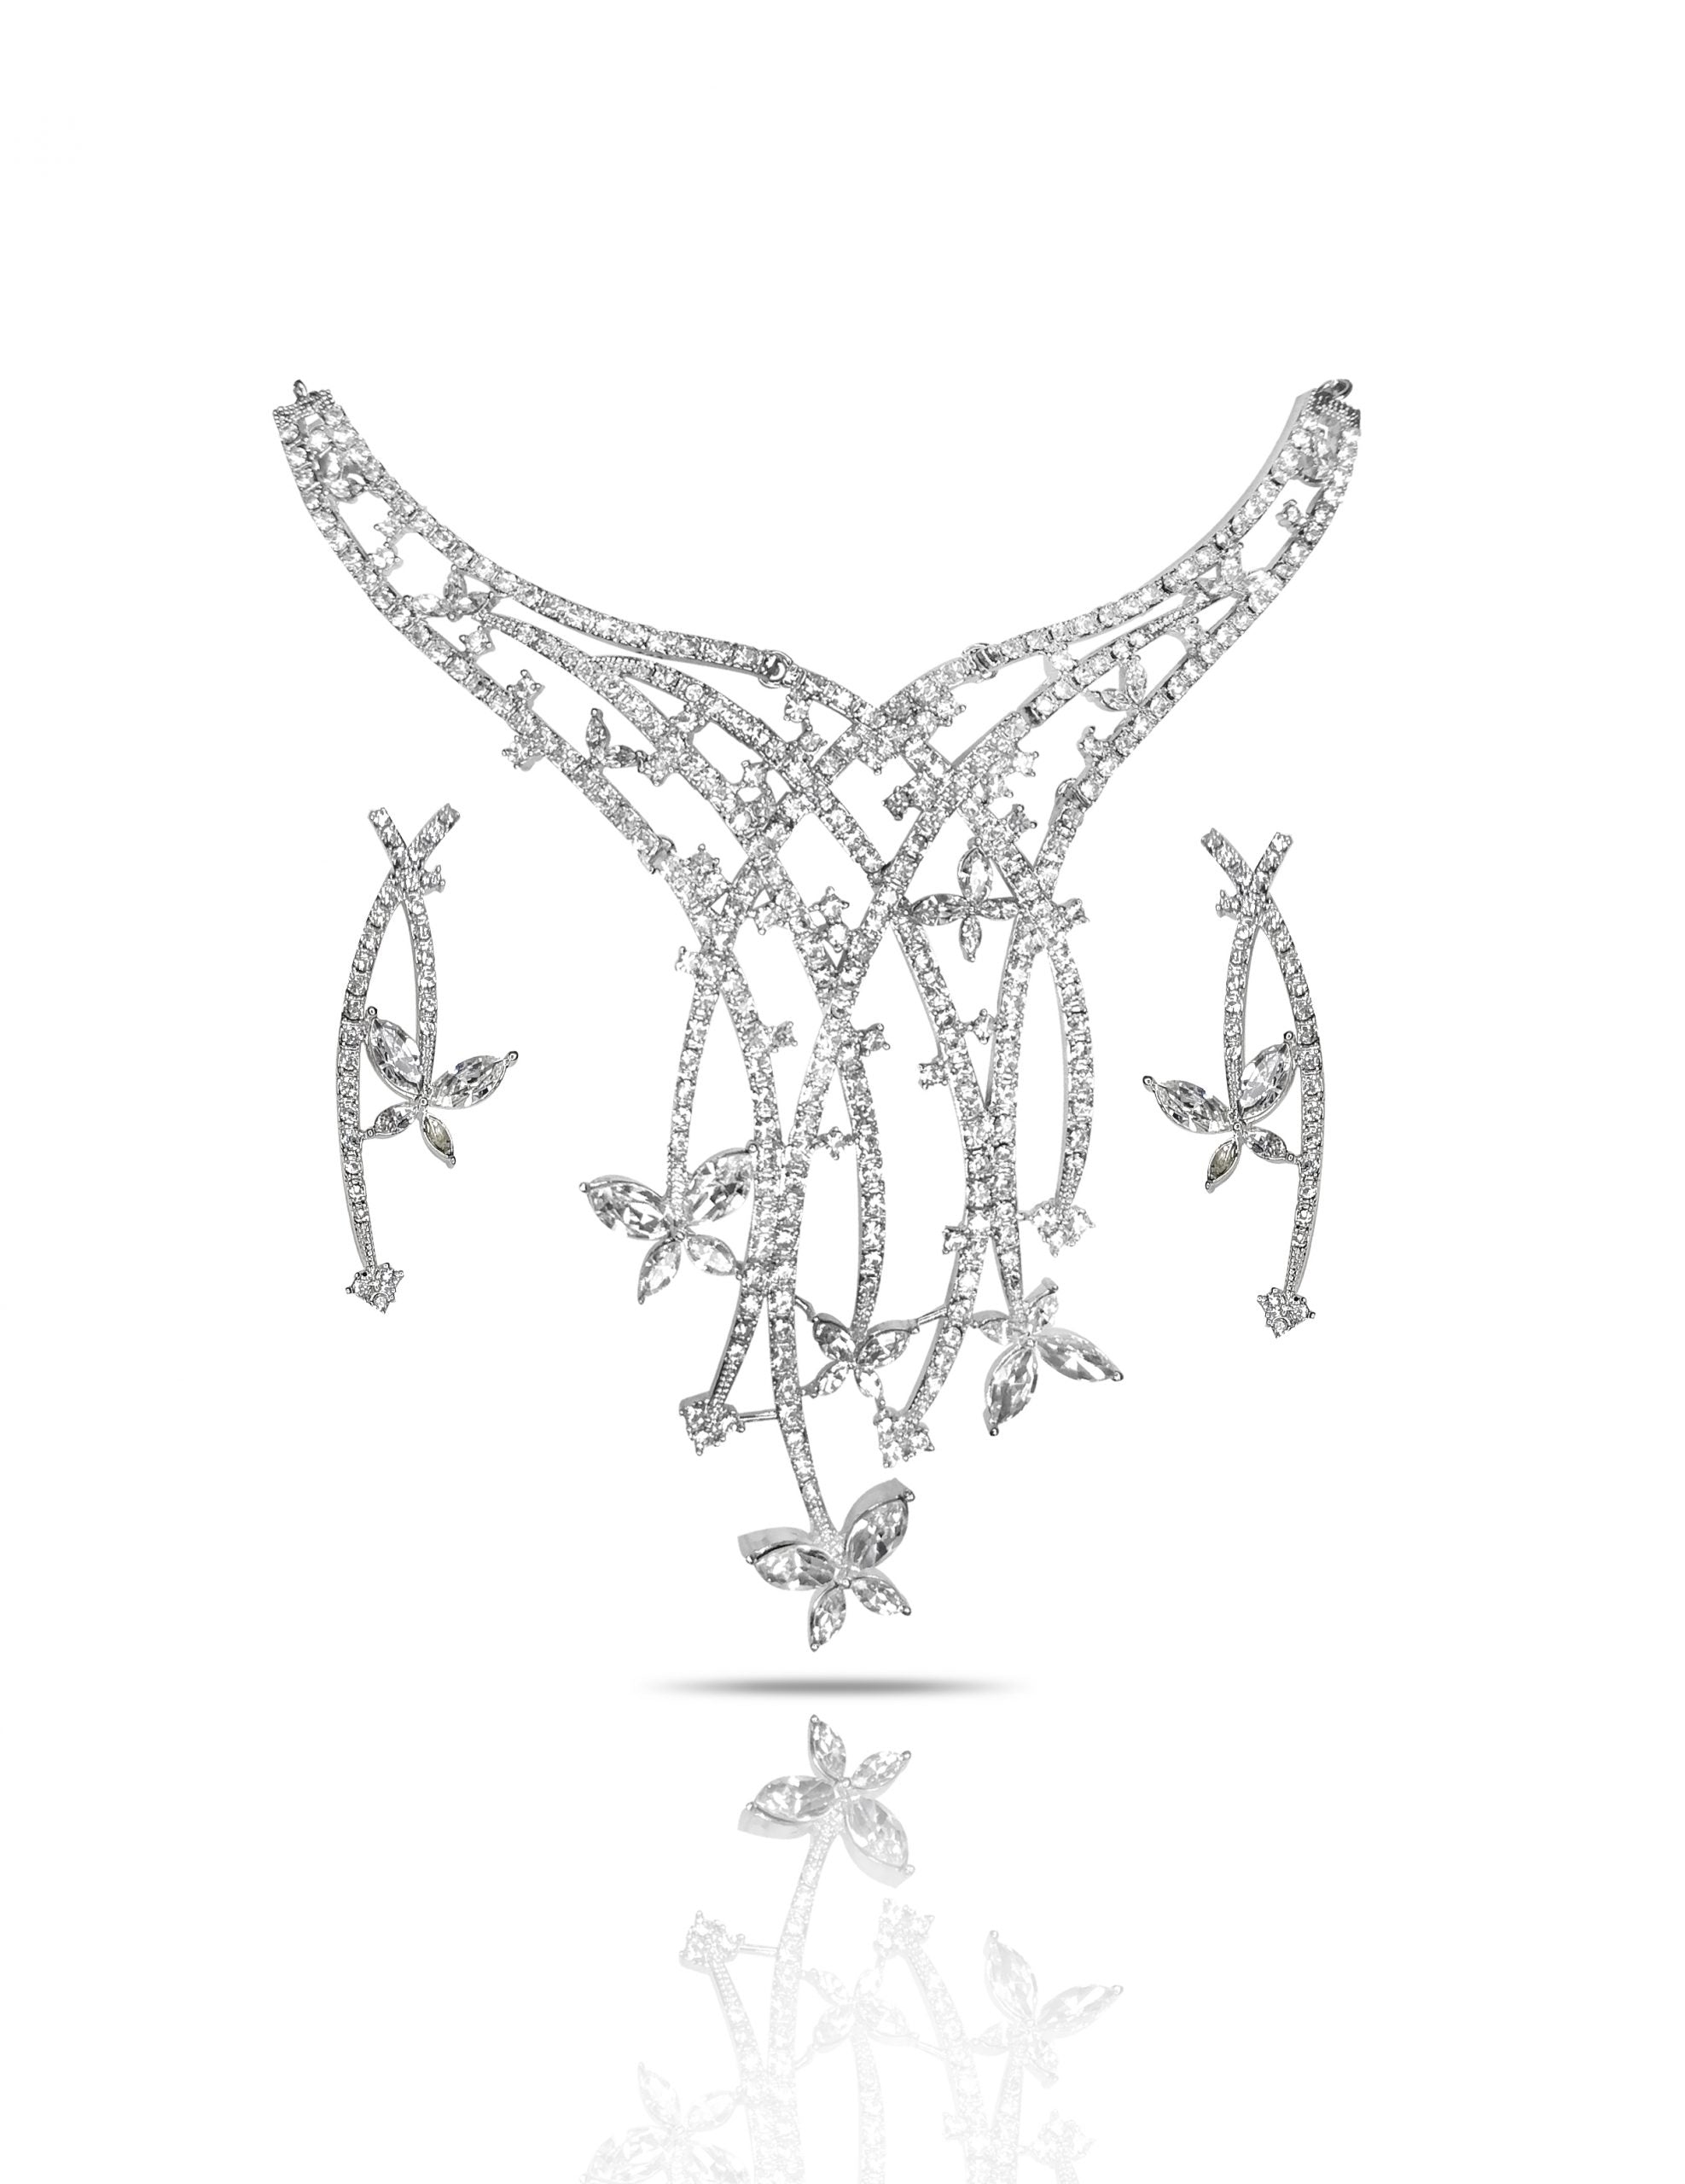 Frost Vines white gold necklace embedded with Fifth Element crystals (NK 005)